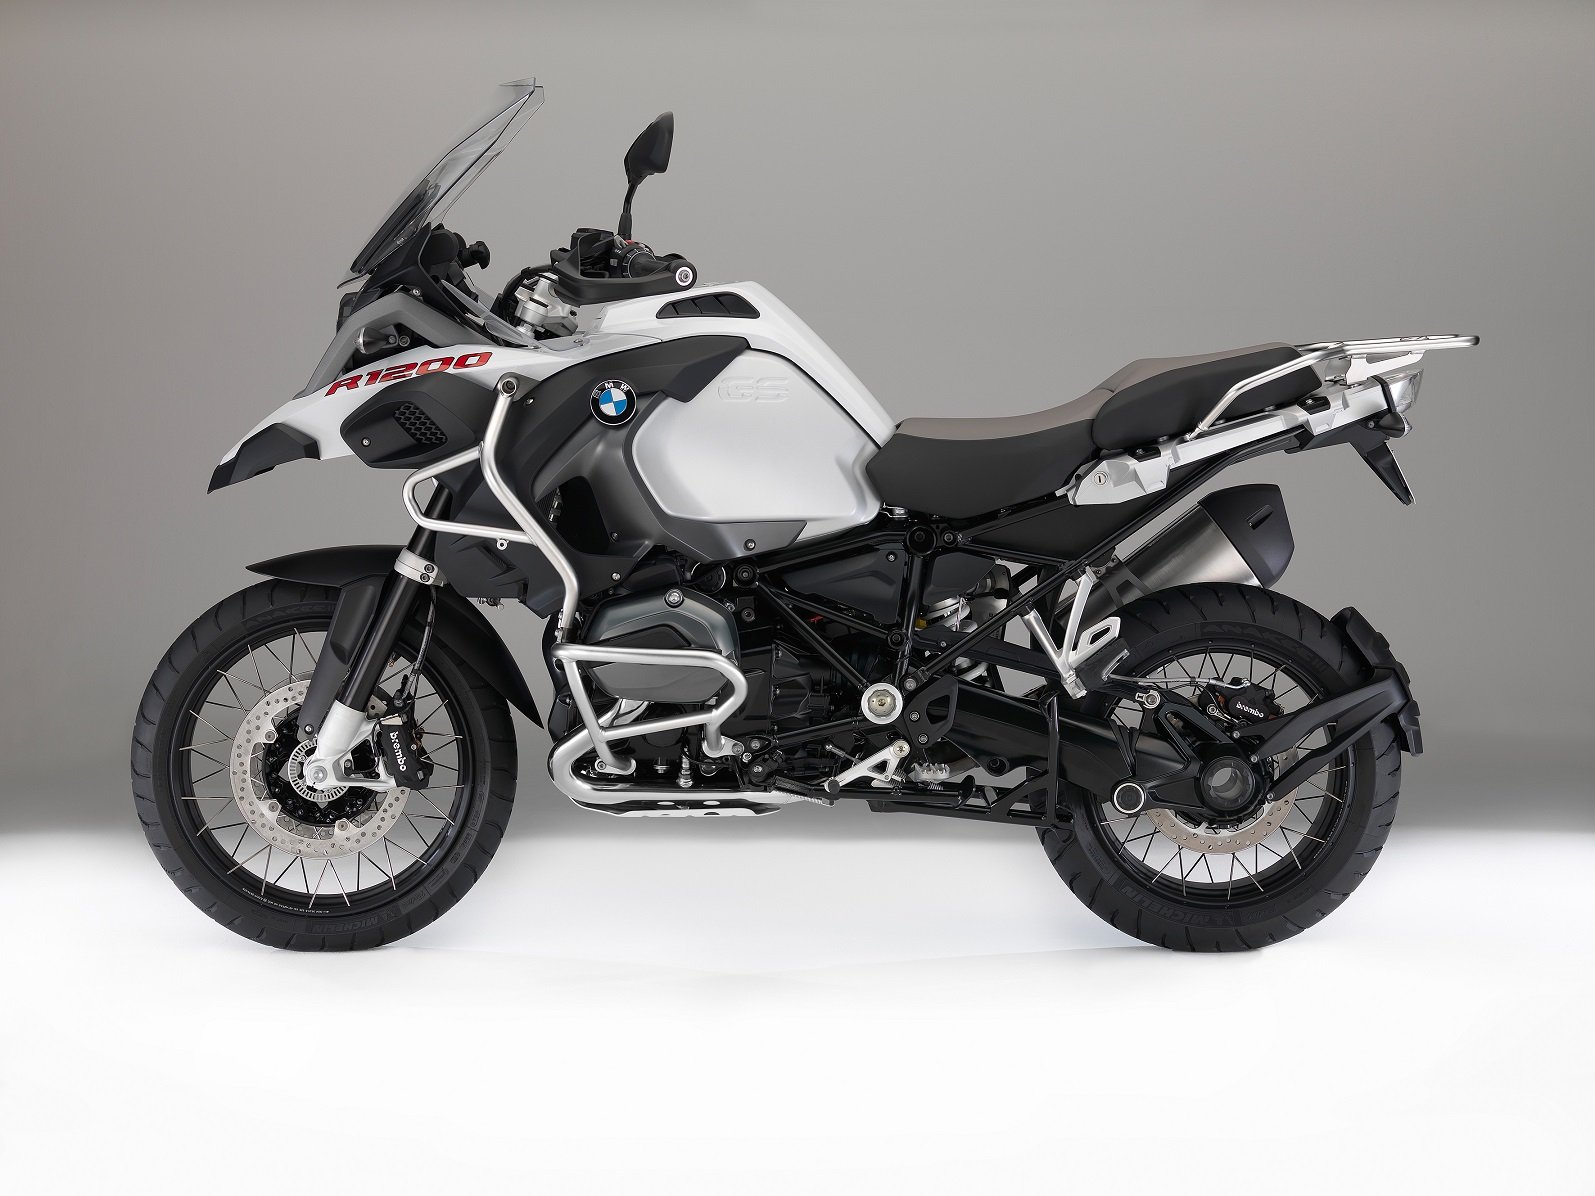 bmw, R, 1200, Gs, Adventure, Motorcycles, Trail, 2015 Wallpaper